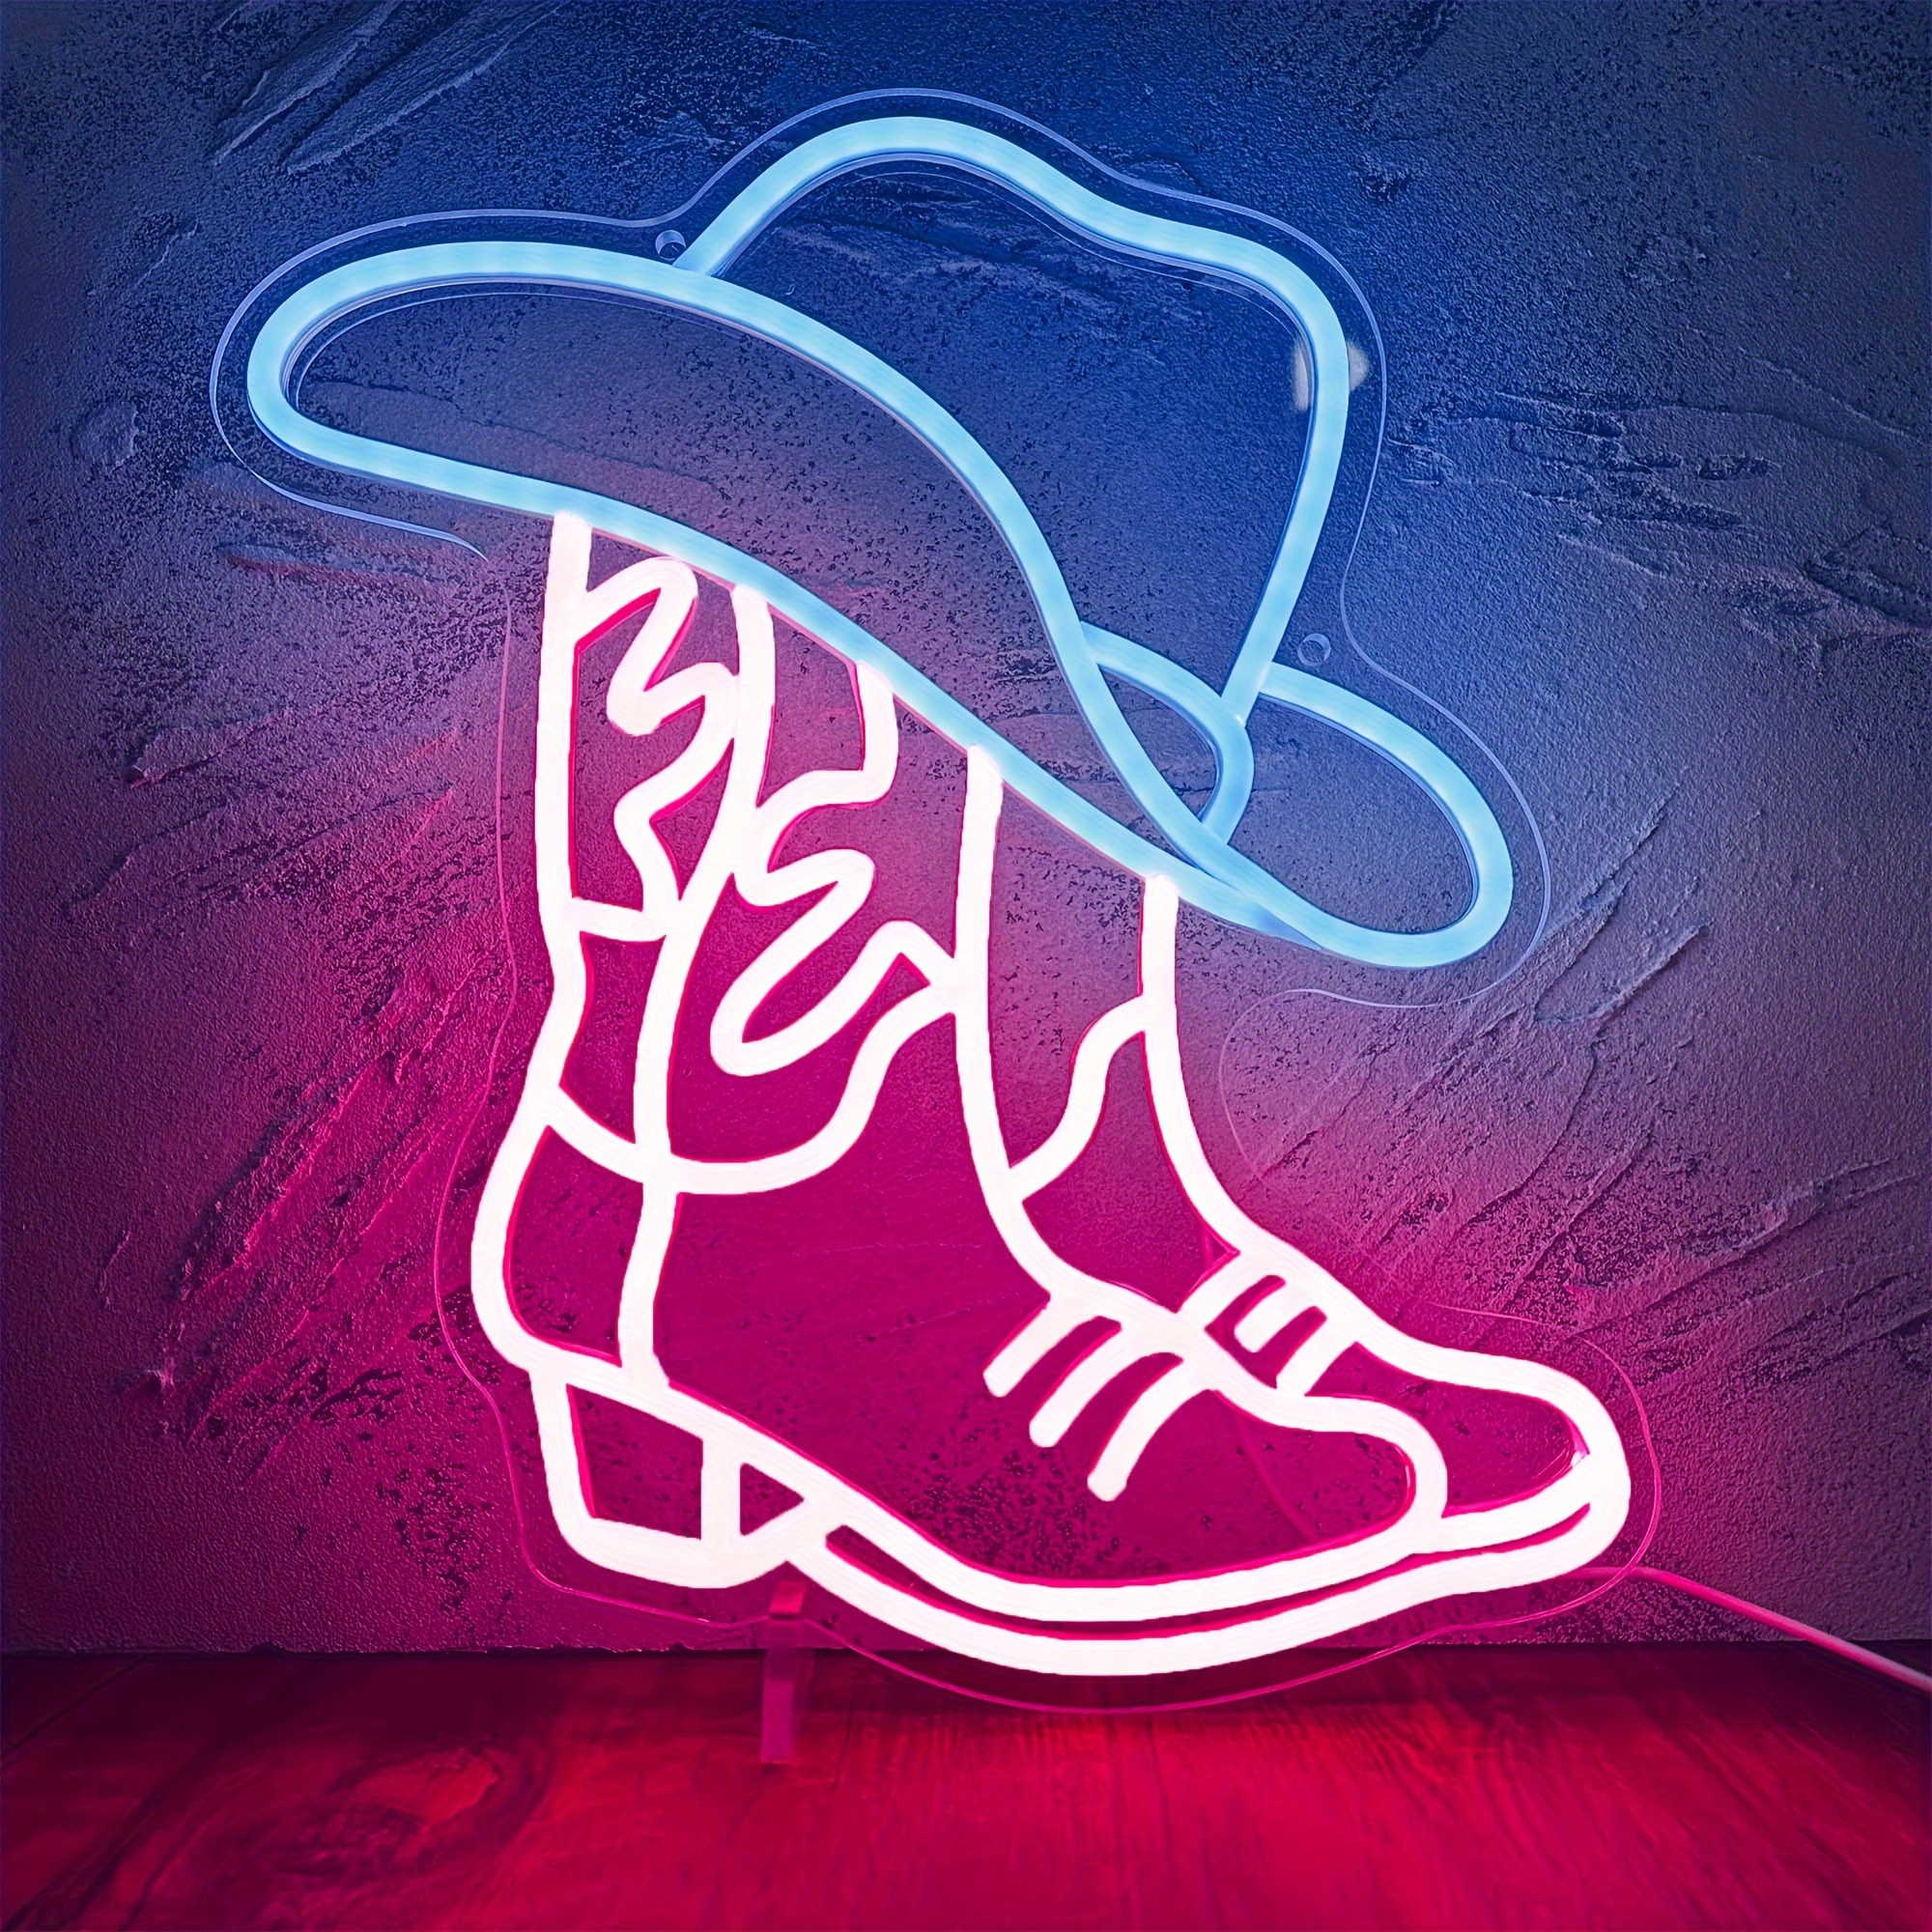 

Cowboy Boot And Hat Neon Sign, Led Pink Cowgirl Boots Neon Sign Wall Sign, Pink Aesthetic Western Wall Art, Usb Powered For Game Room Bedroom Party Bar Wedding Christmas Birthday Gift